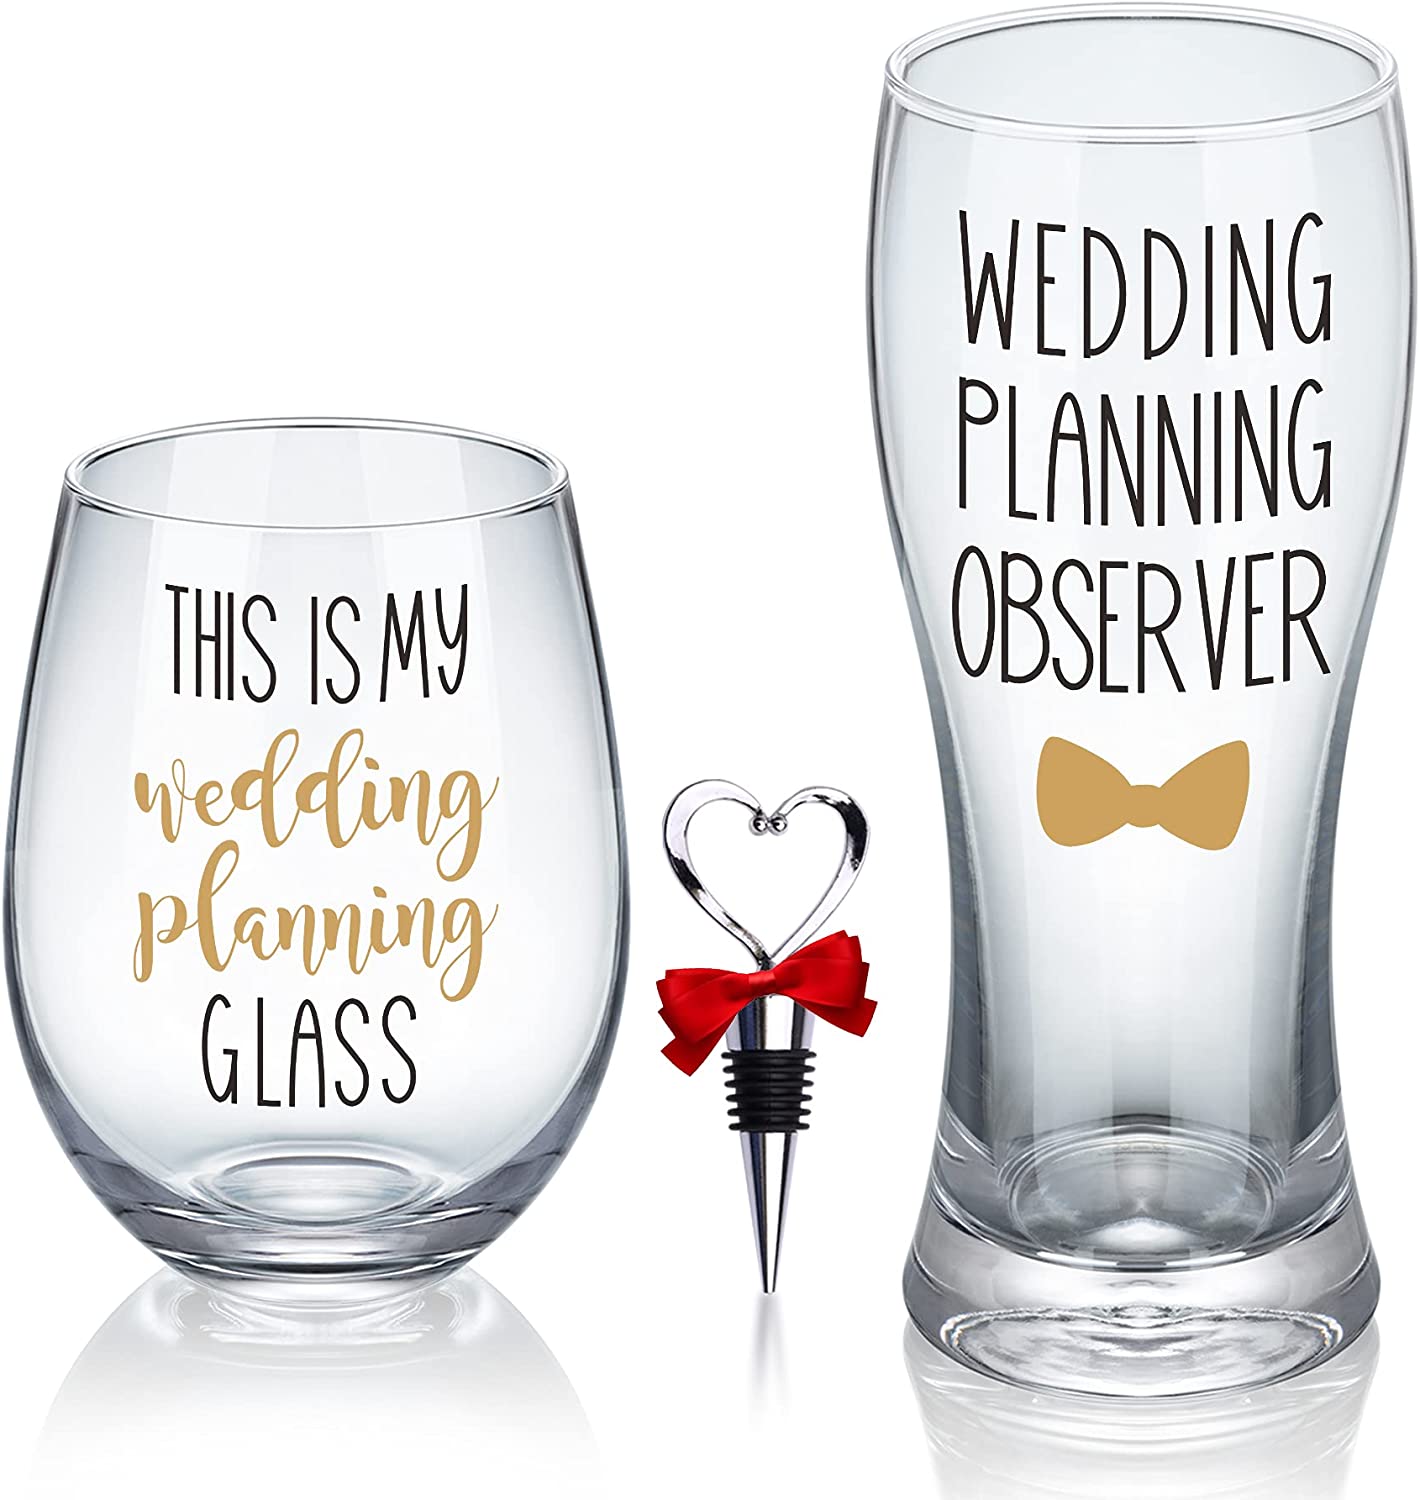 This is My Wedding Planning Glass Set, Engagement Gift for Couples, Mr & Mrs Gift, Anniversary, Wedding Gift for Newlyweds, Bride and Groom, Bridal Shower Gift Set by Gemwi on Aamazon